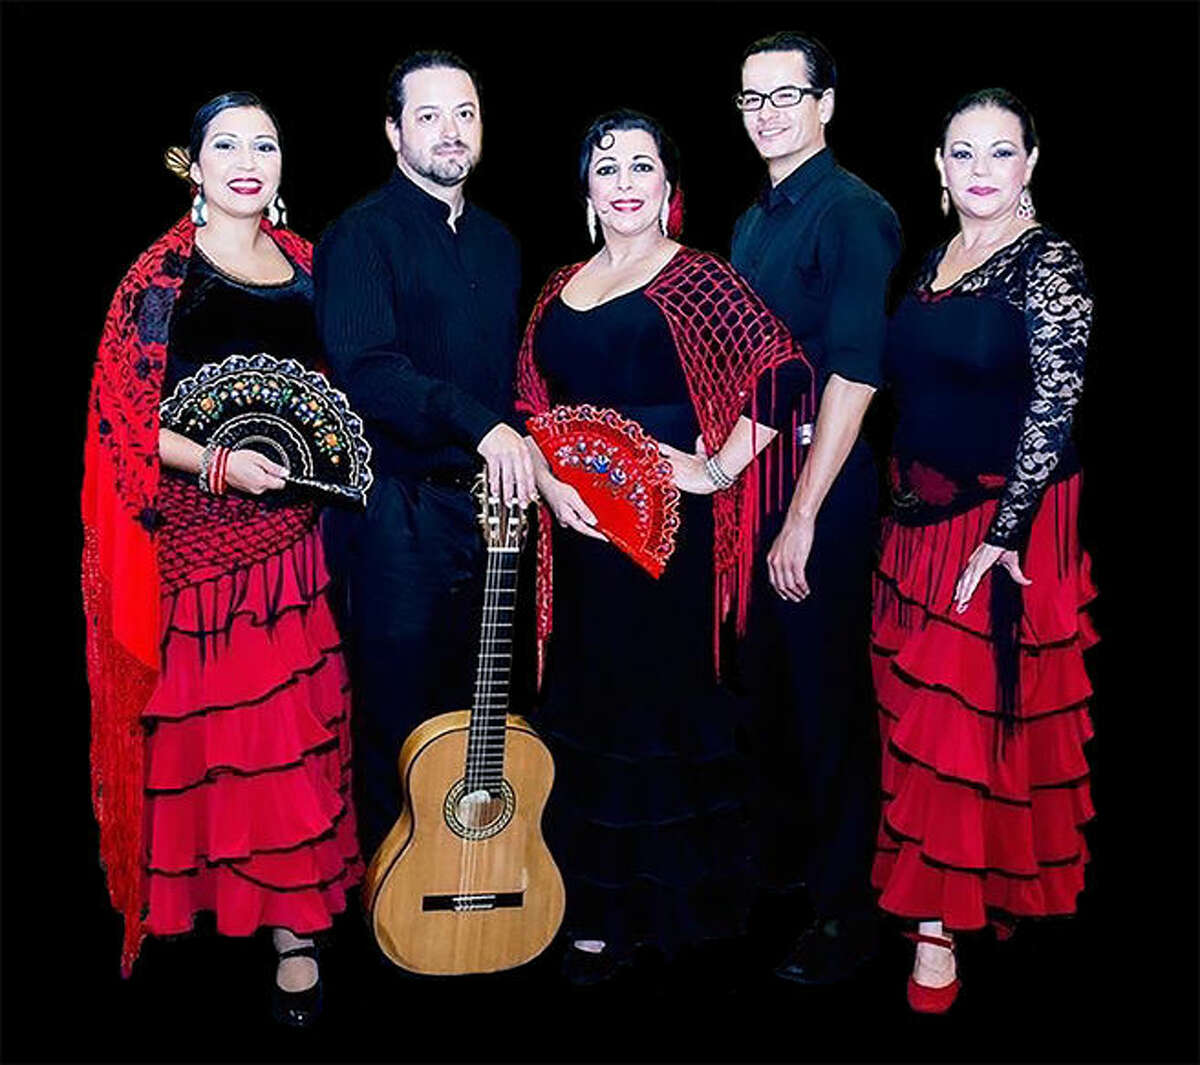 Latin Flamenco group Solero Flamenco is set to headline this year’s third annual Rio Grande Arts Festival concert on Saturday at 6:30 p.m. at the Guadalupe and Lilia Martinez Fine Arts Center theater at Laredo Community College’s Fort McIntosh campus. Admission to the concert and festival is free and open to the public.